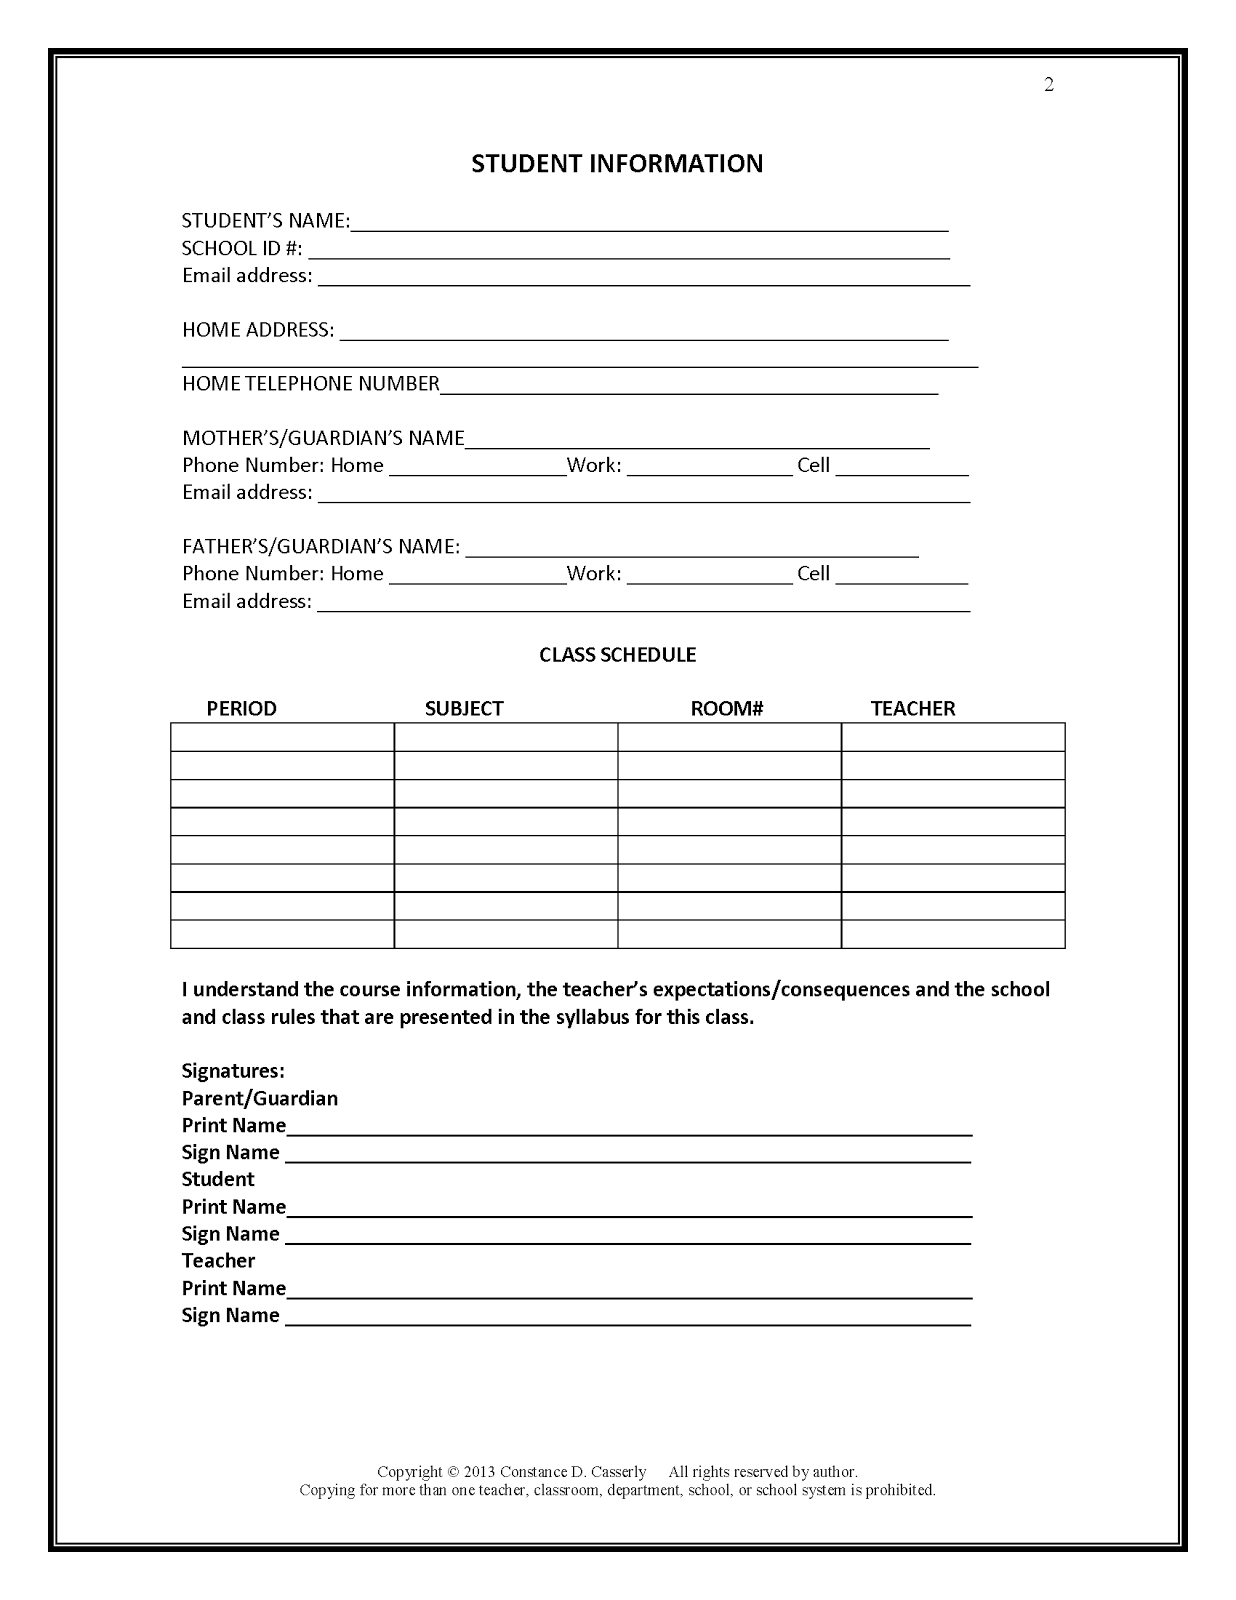 27 Images Of Student Information Form Template | Bfegy With Inside Student Information Card Template